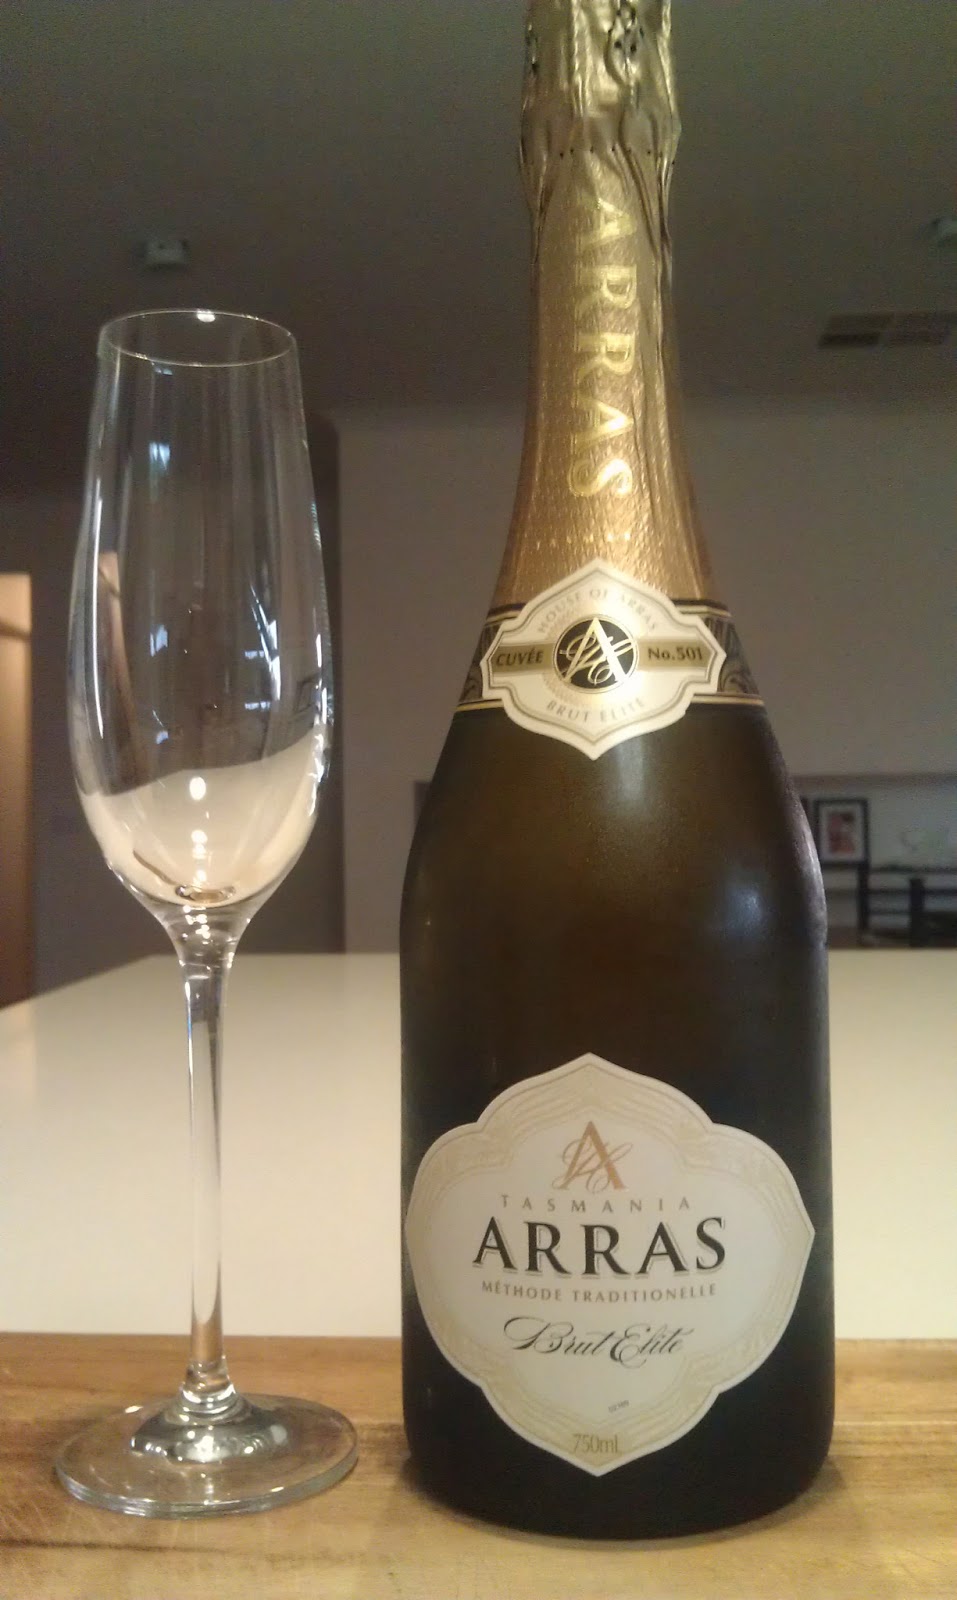 Good Wine Review by Chad & Norriega House of Arras Brut